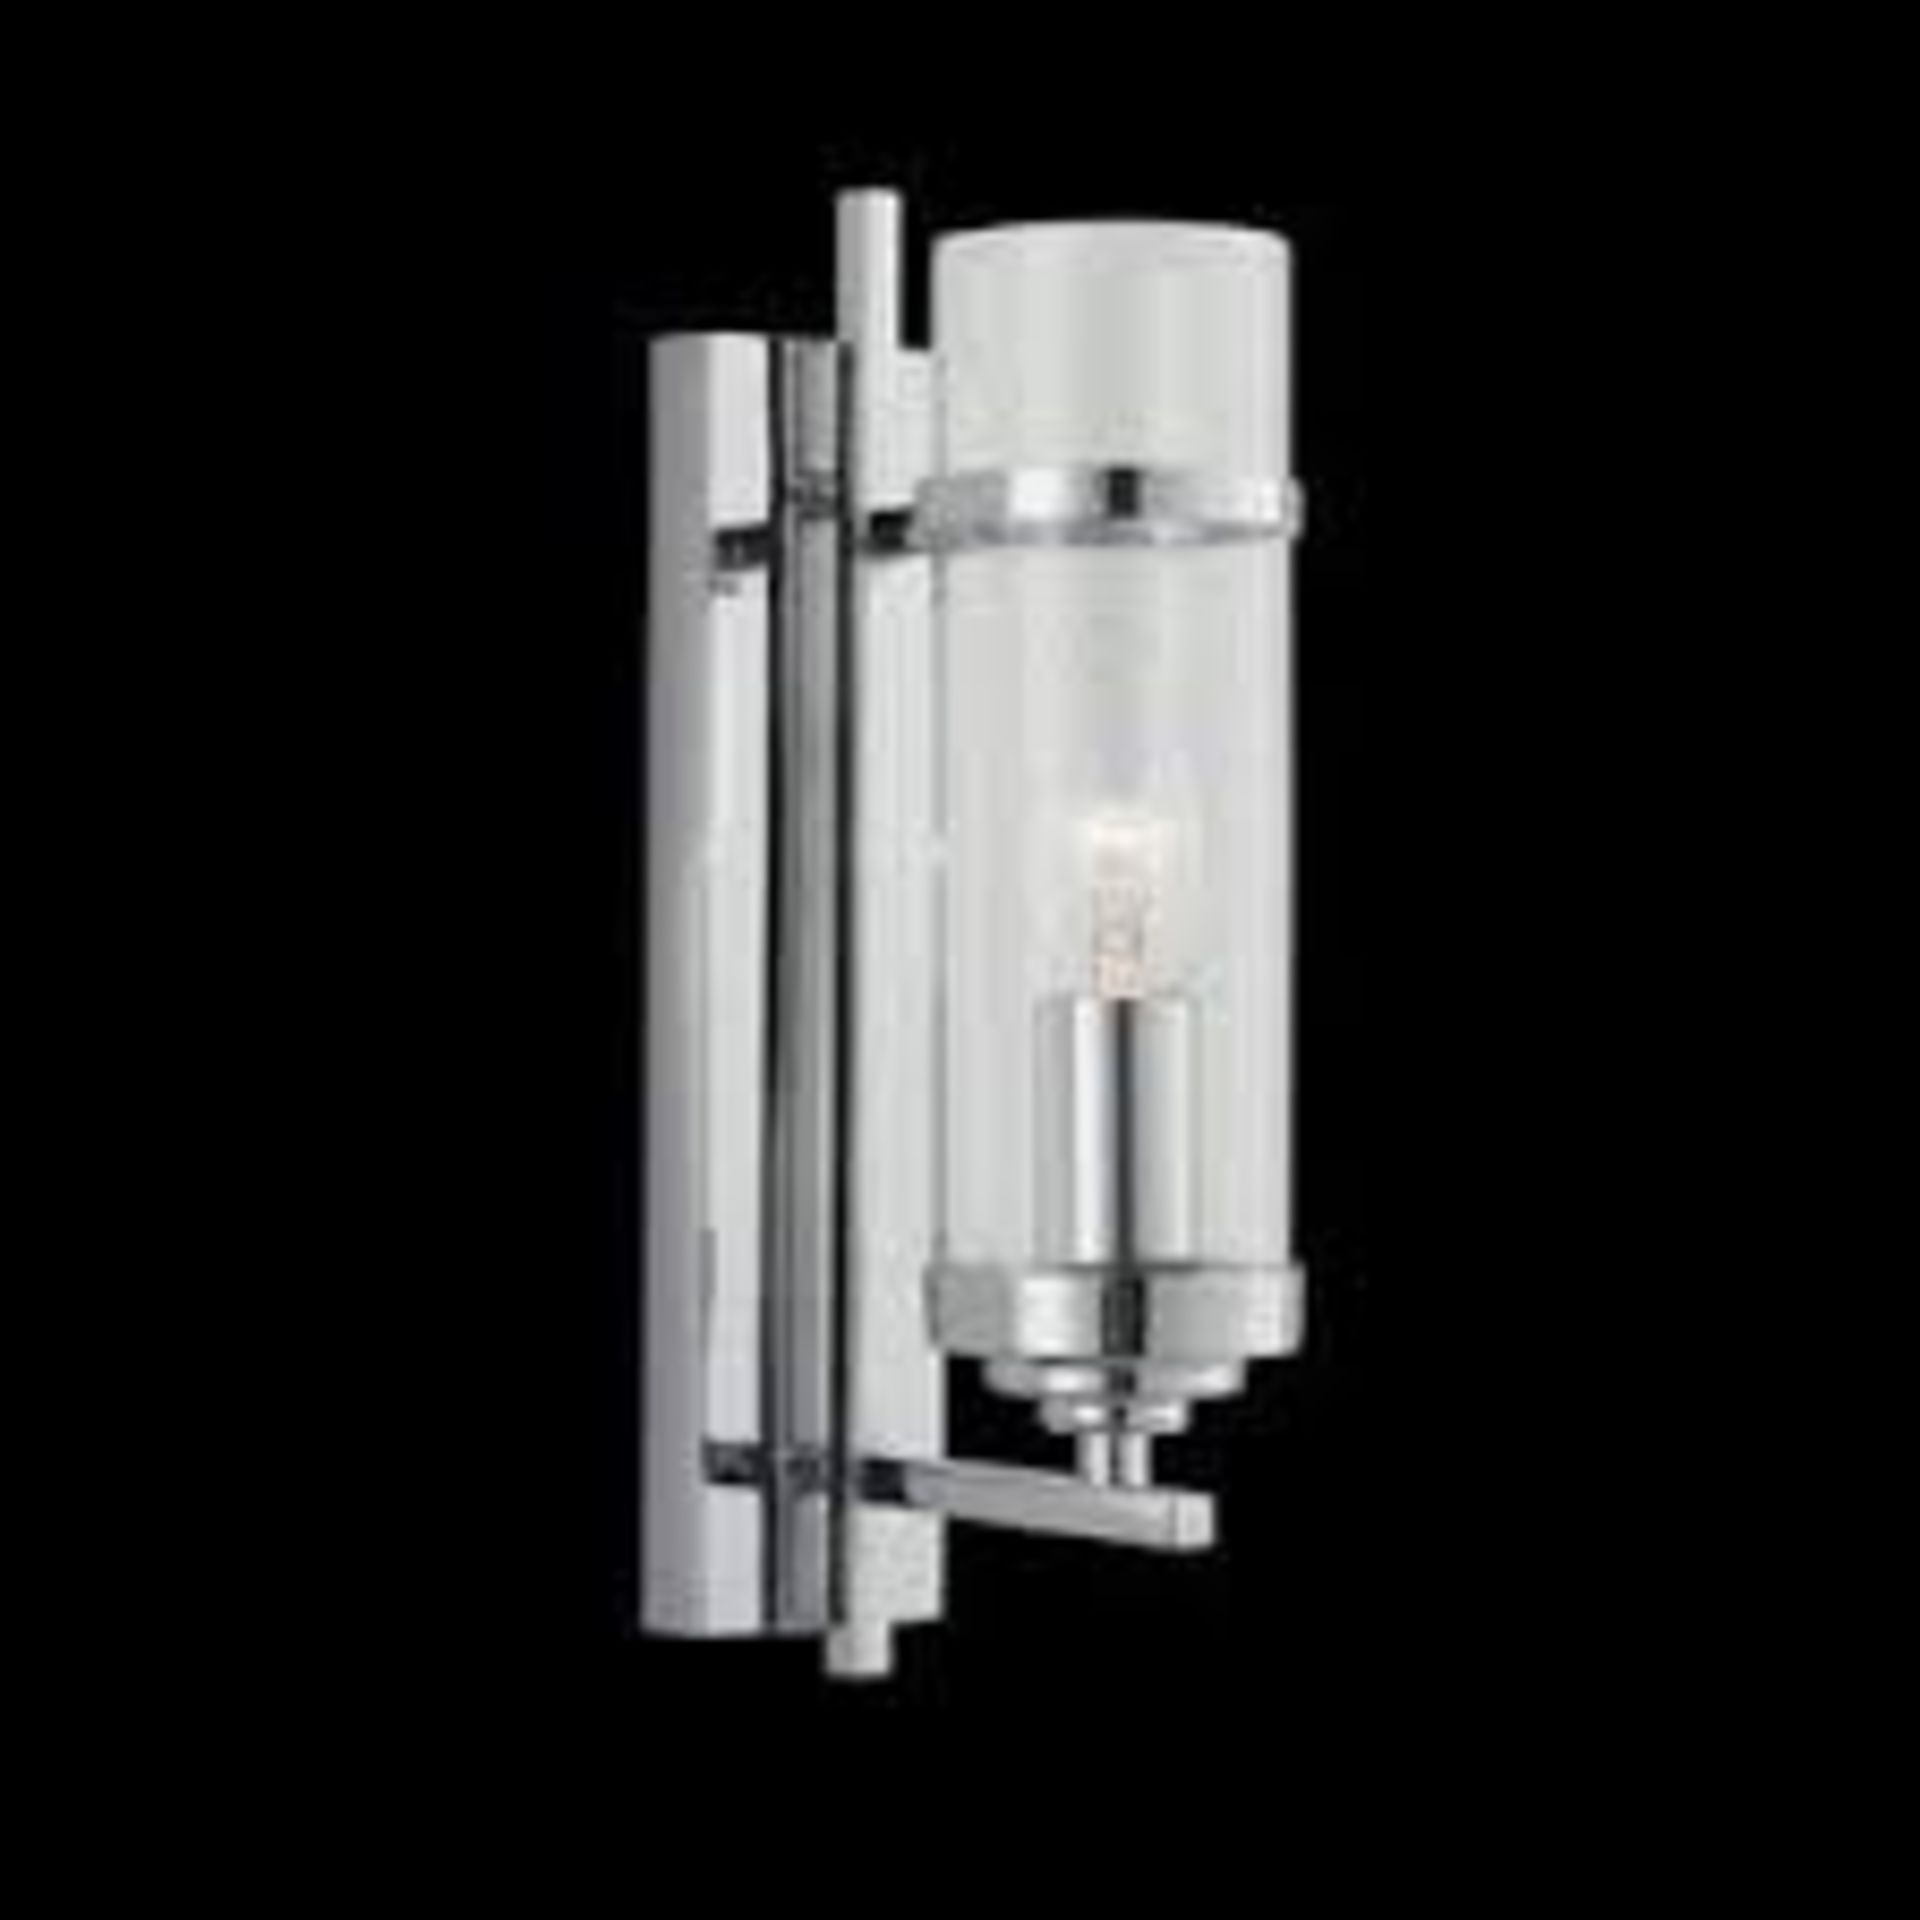 1 x Searchlight Milo Wall Light in polished chrome - Ref: 3091-1CC - New and Boxed - RRP: £65.00 - Image 2 of 4